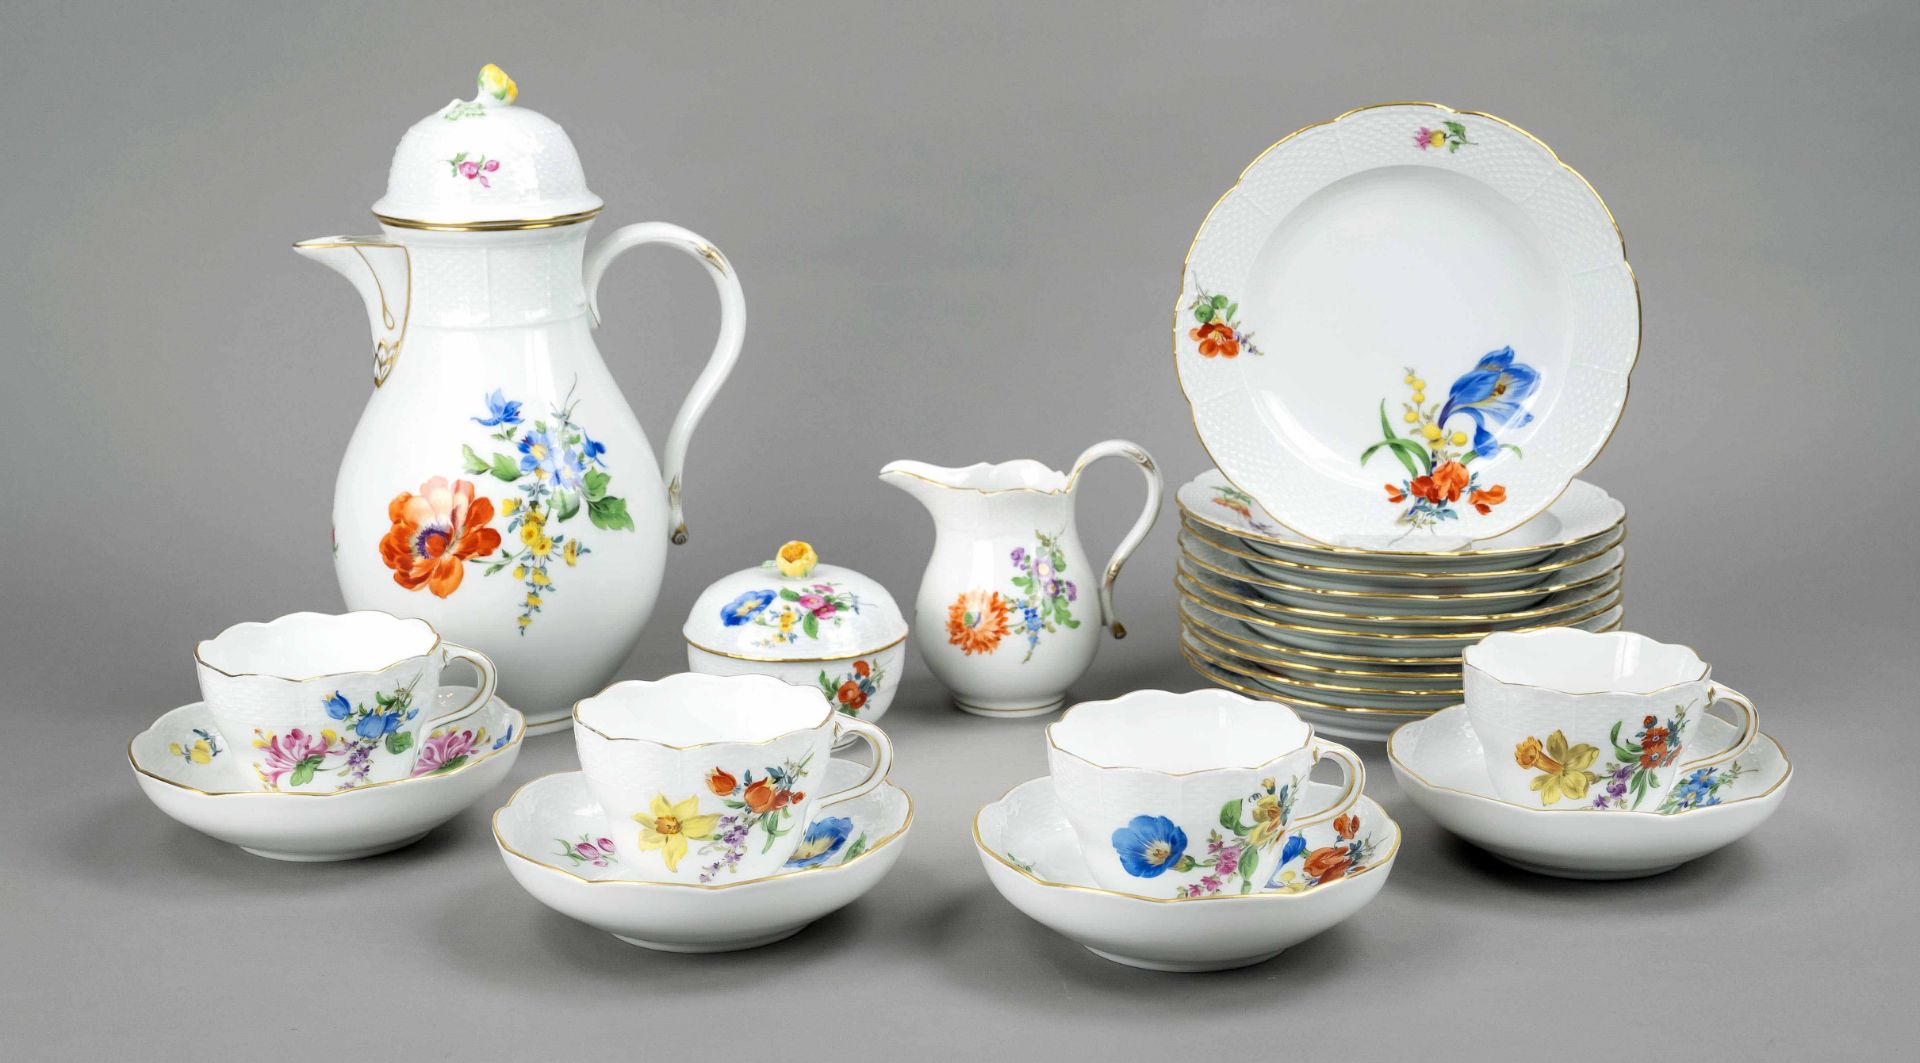 Coffee service for 10 persons, 33 pieces, Meissen, 2nd half of 20th century, 2nd choice, form Alt-